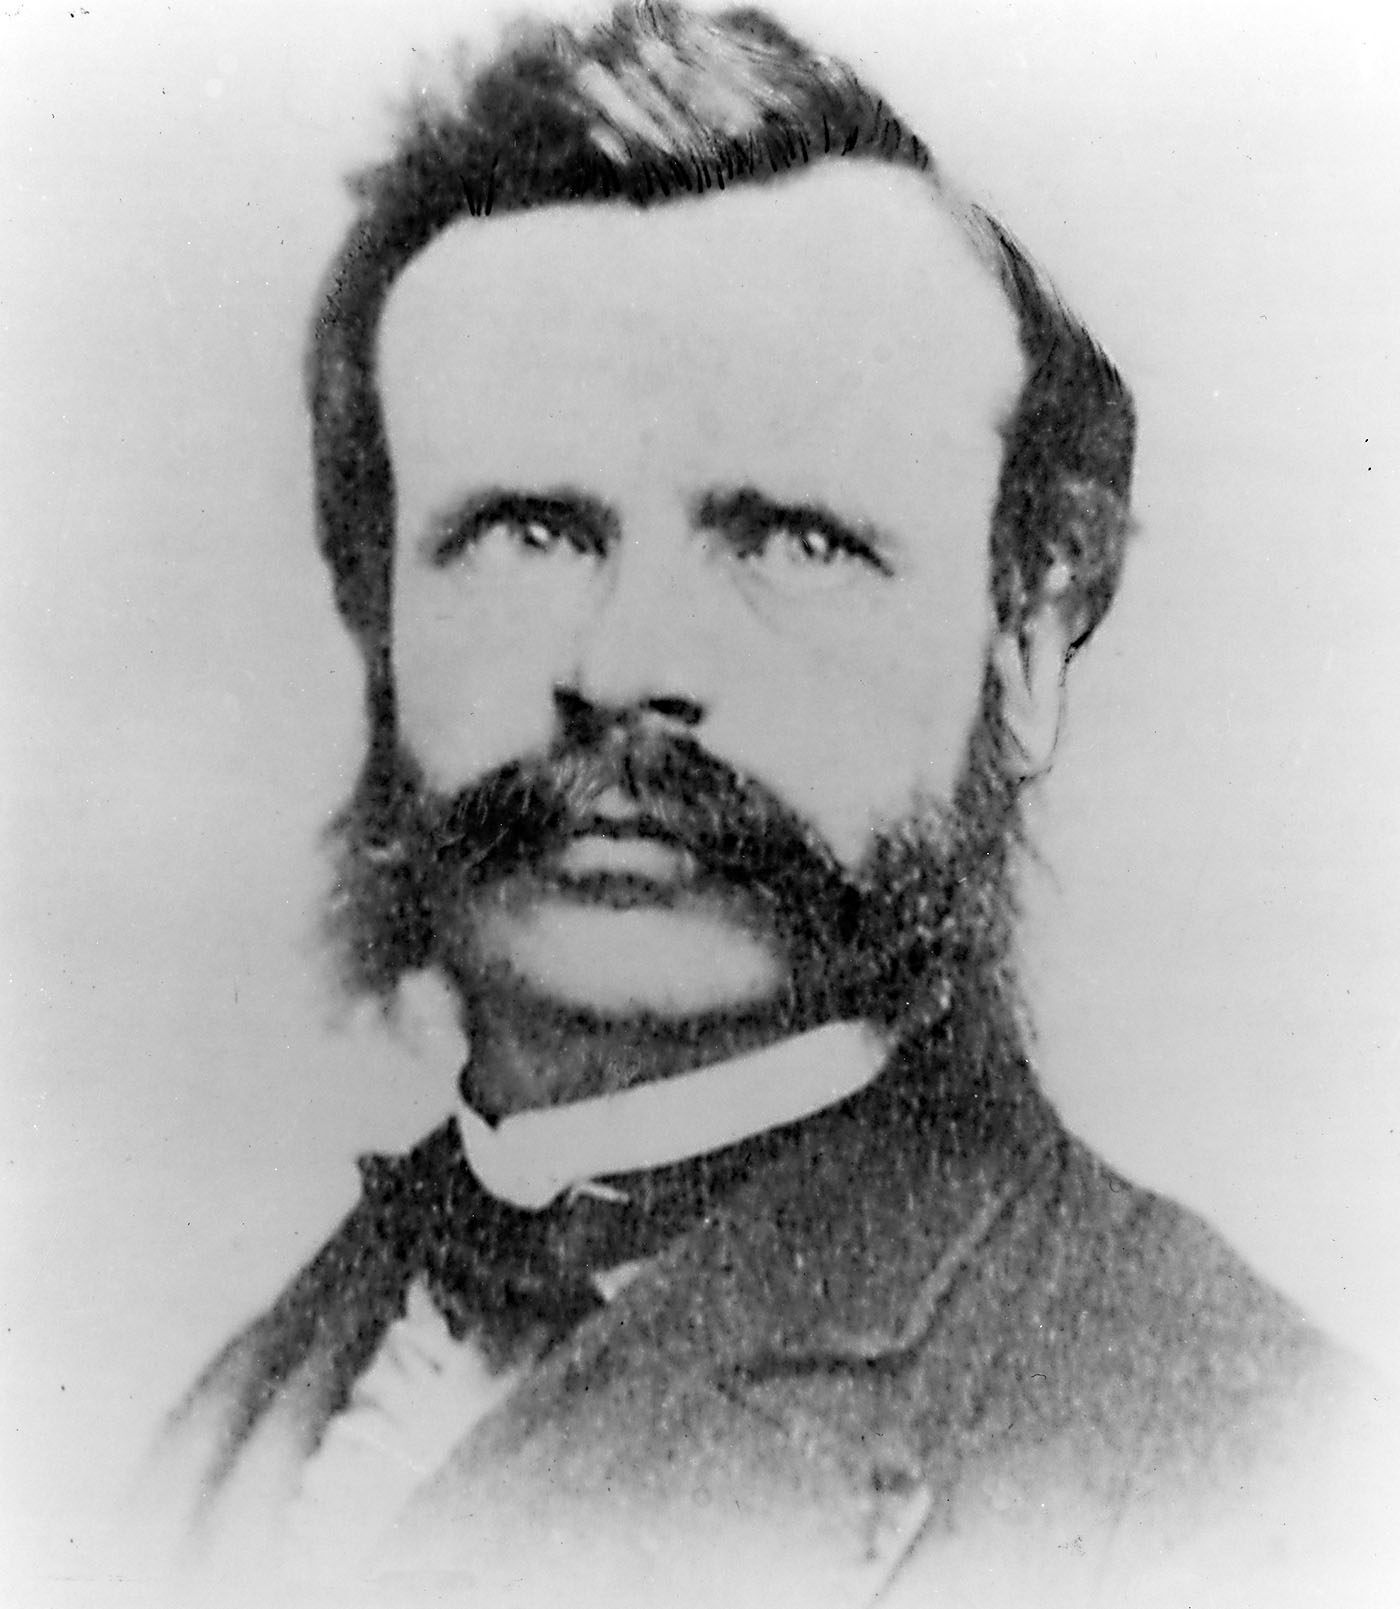 Portrait of Powell with a mustache